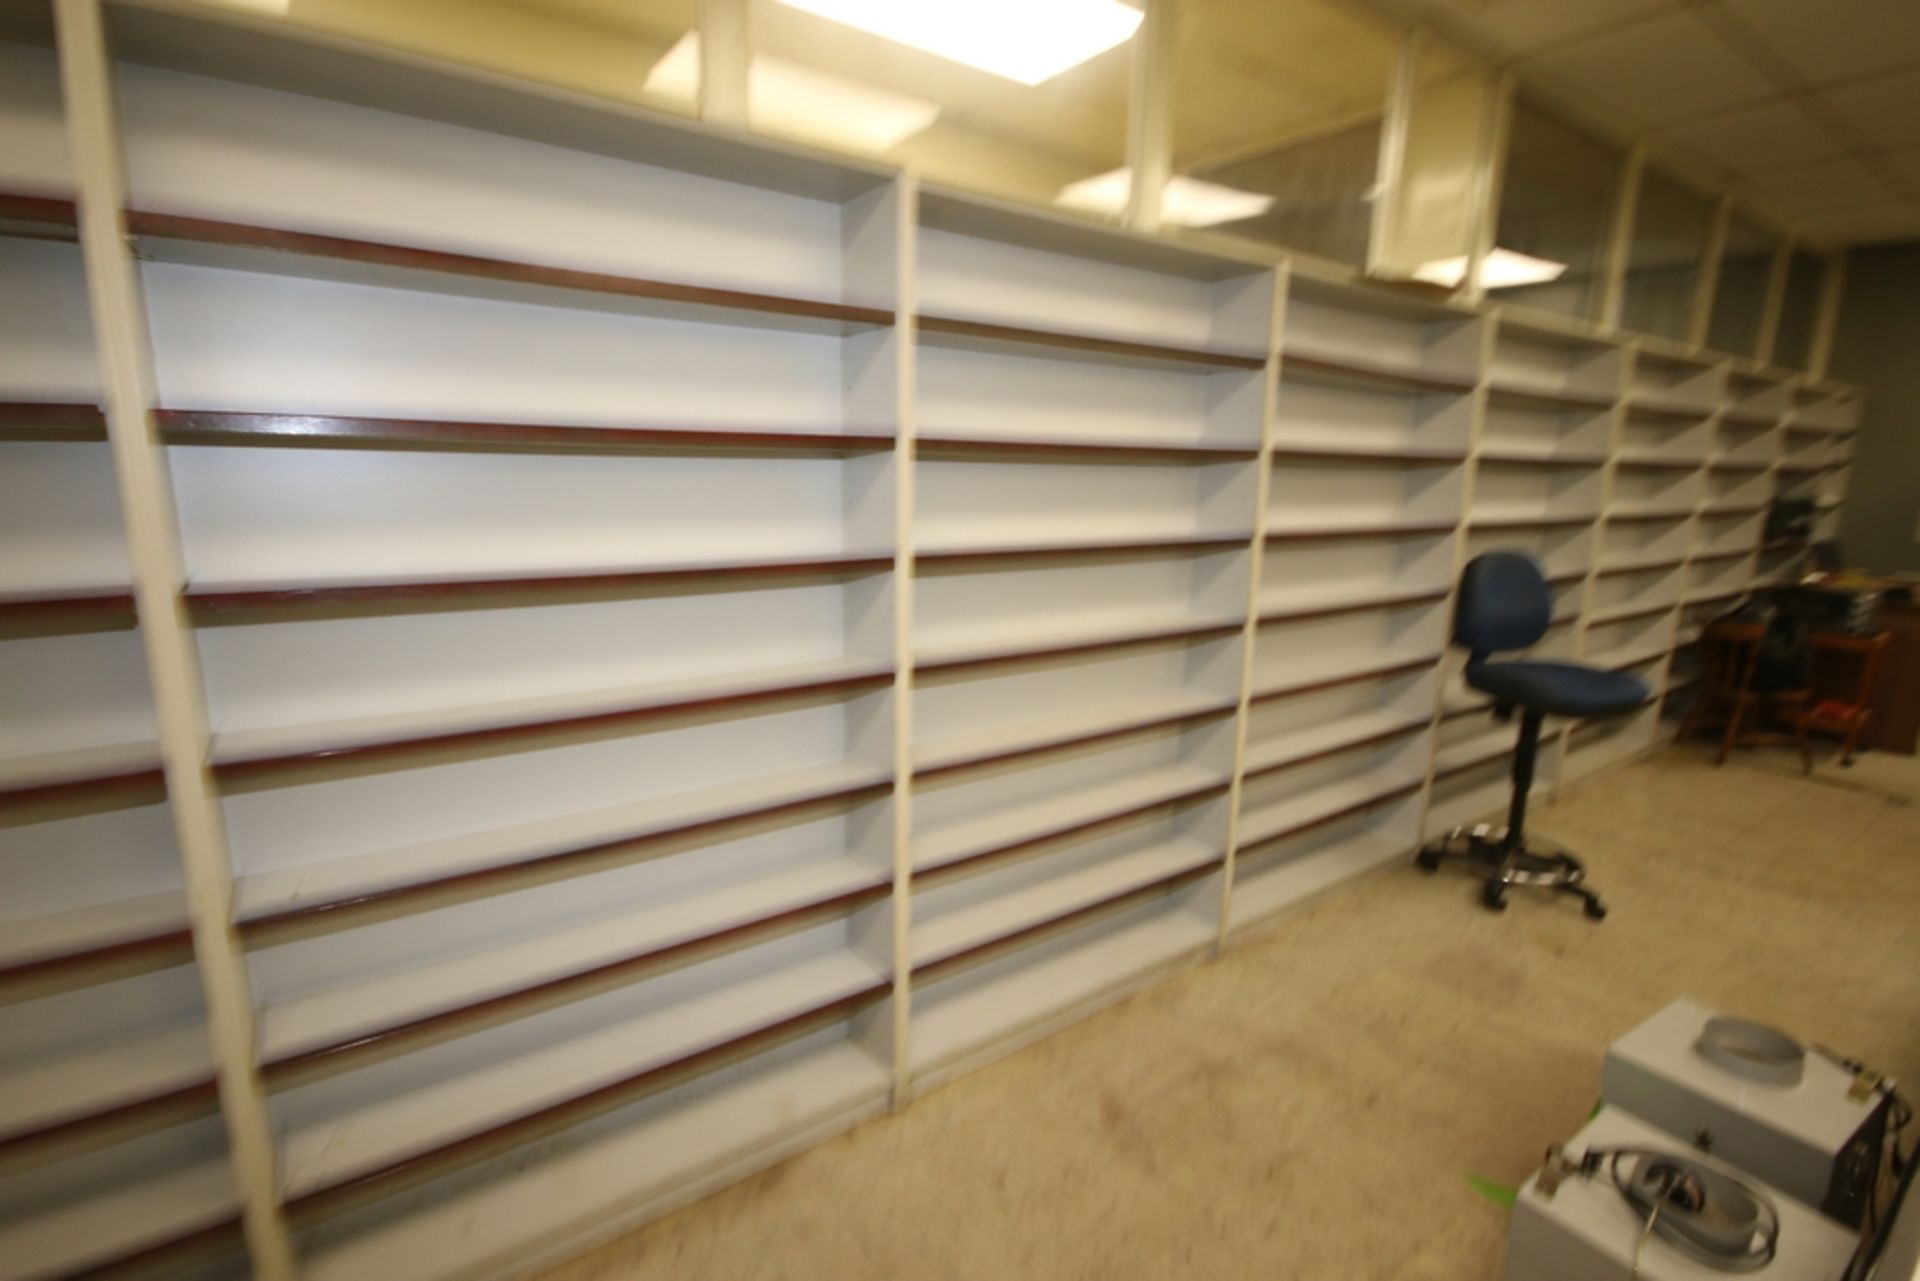 Sections of Wooden Lab Shelving, Section Overall Dims.: Aprox. 7' H x 4' W - Image 2 of 4